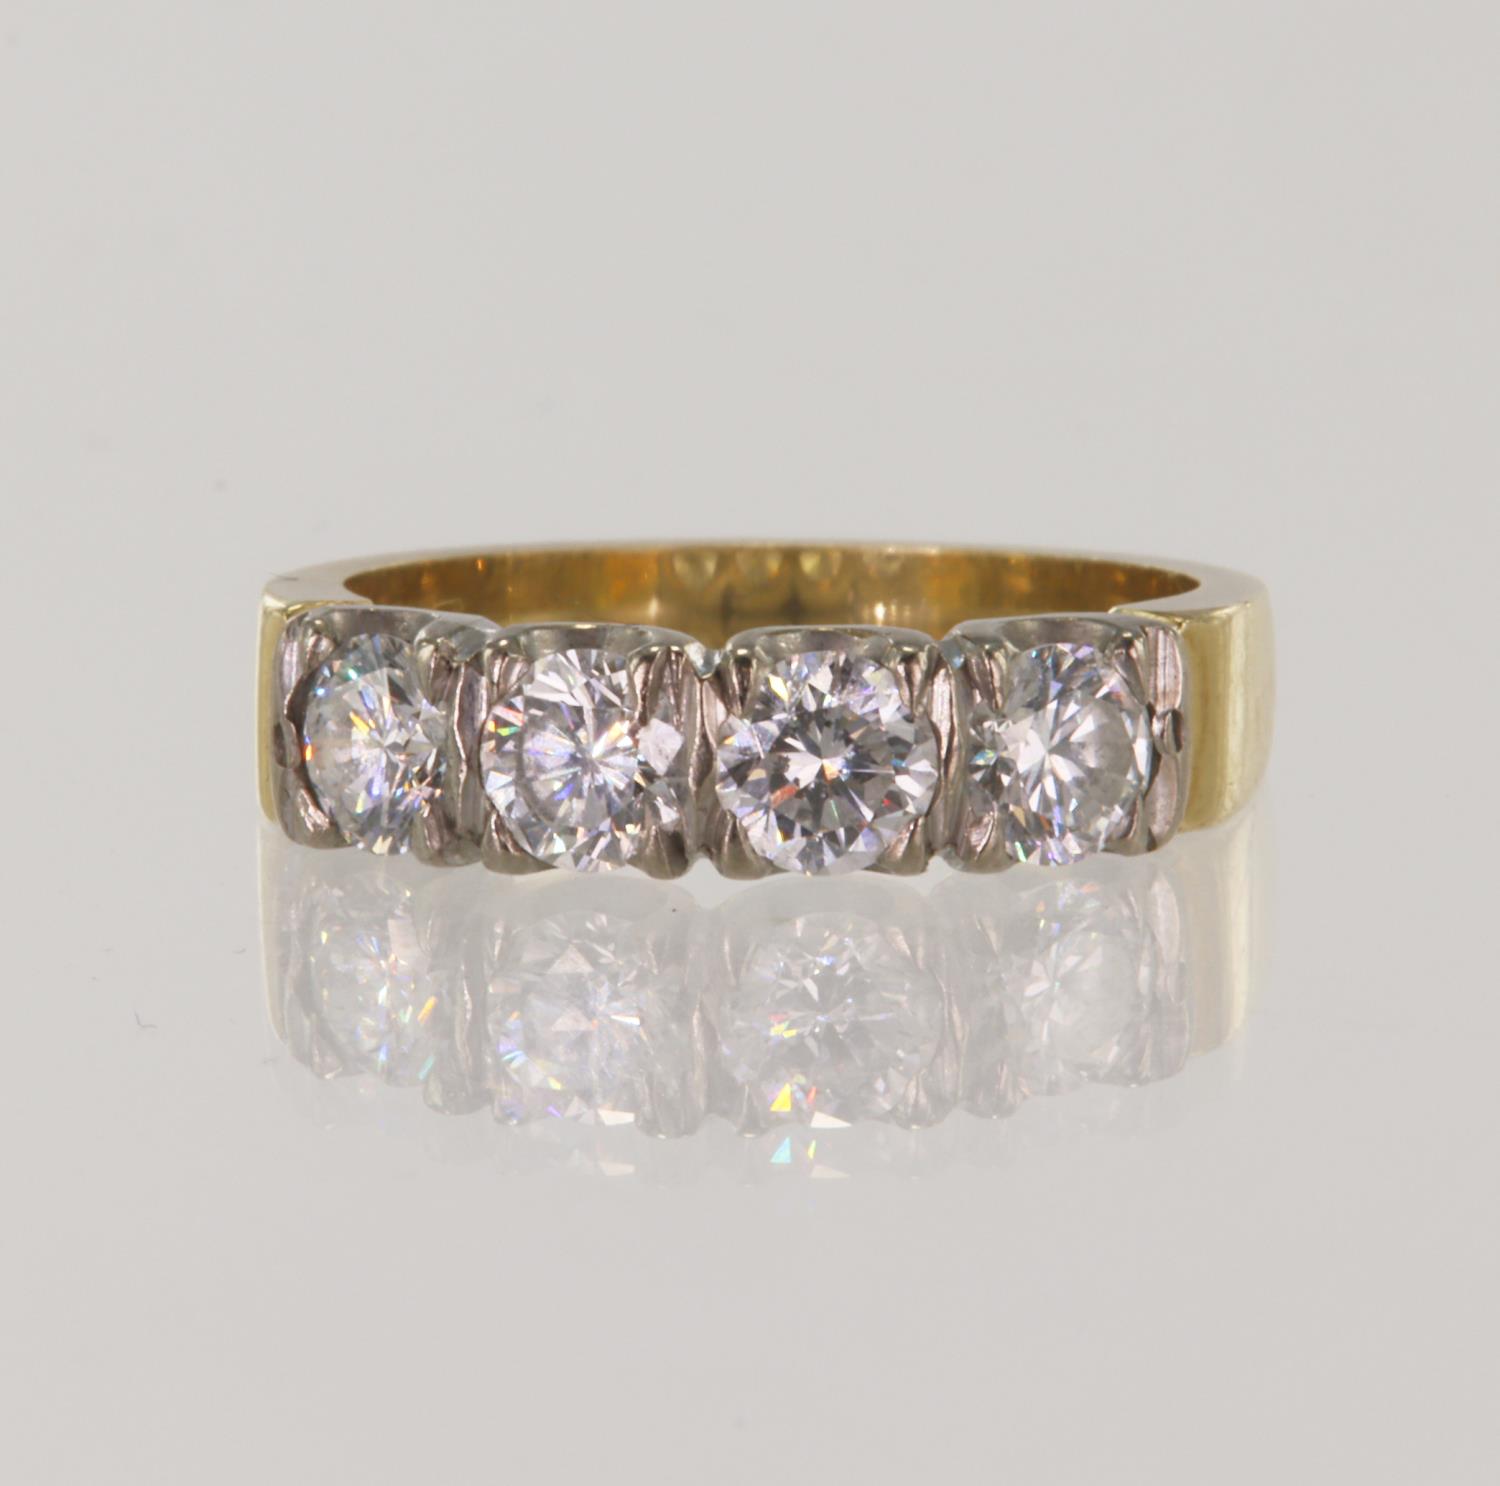 Yellow gold (tests 18ct) diamond four stone ring, four round brilliant cut diamond approx 0.30ct